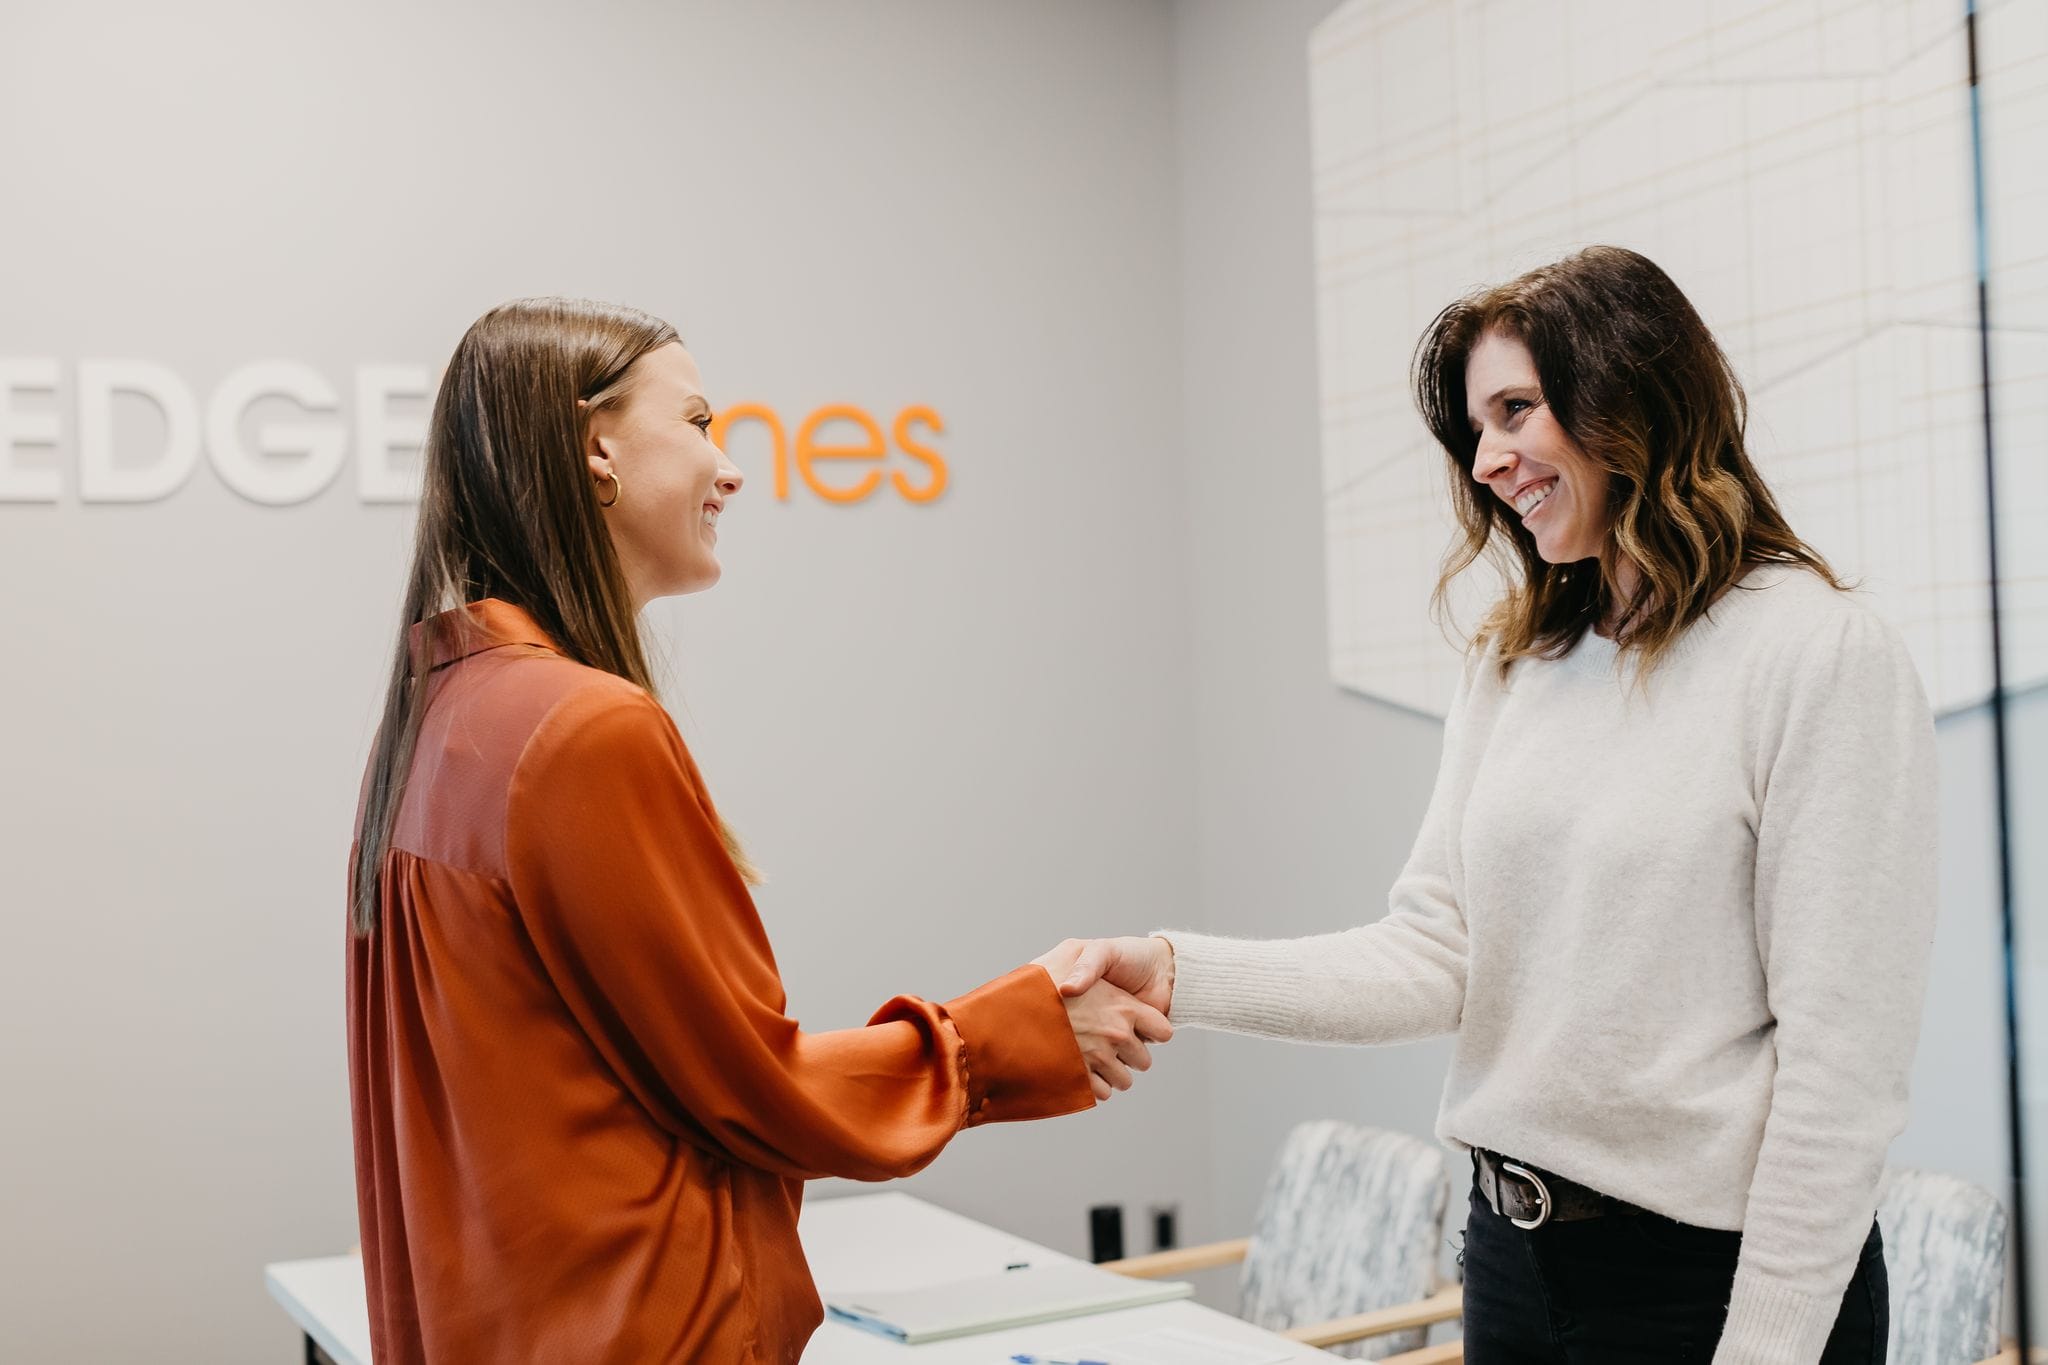 EDGEhomes agent shaking hands with a young woman